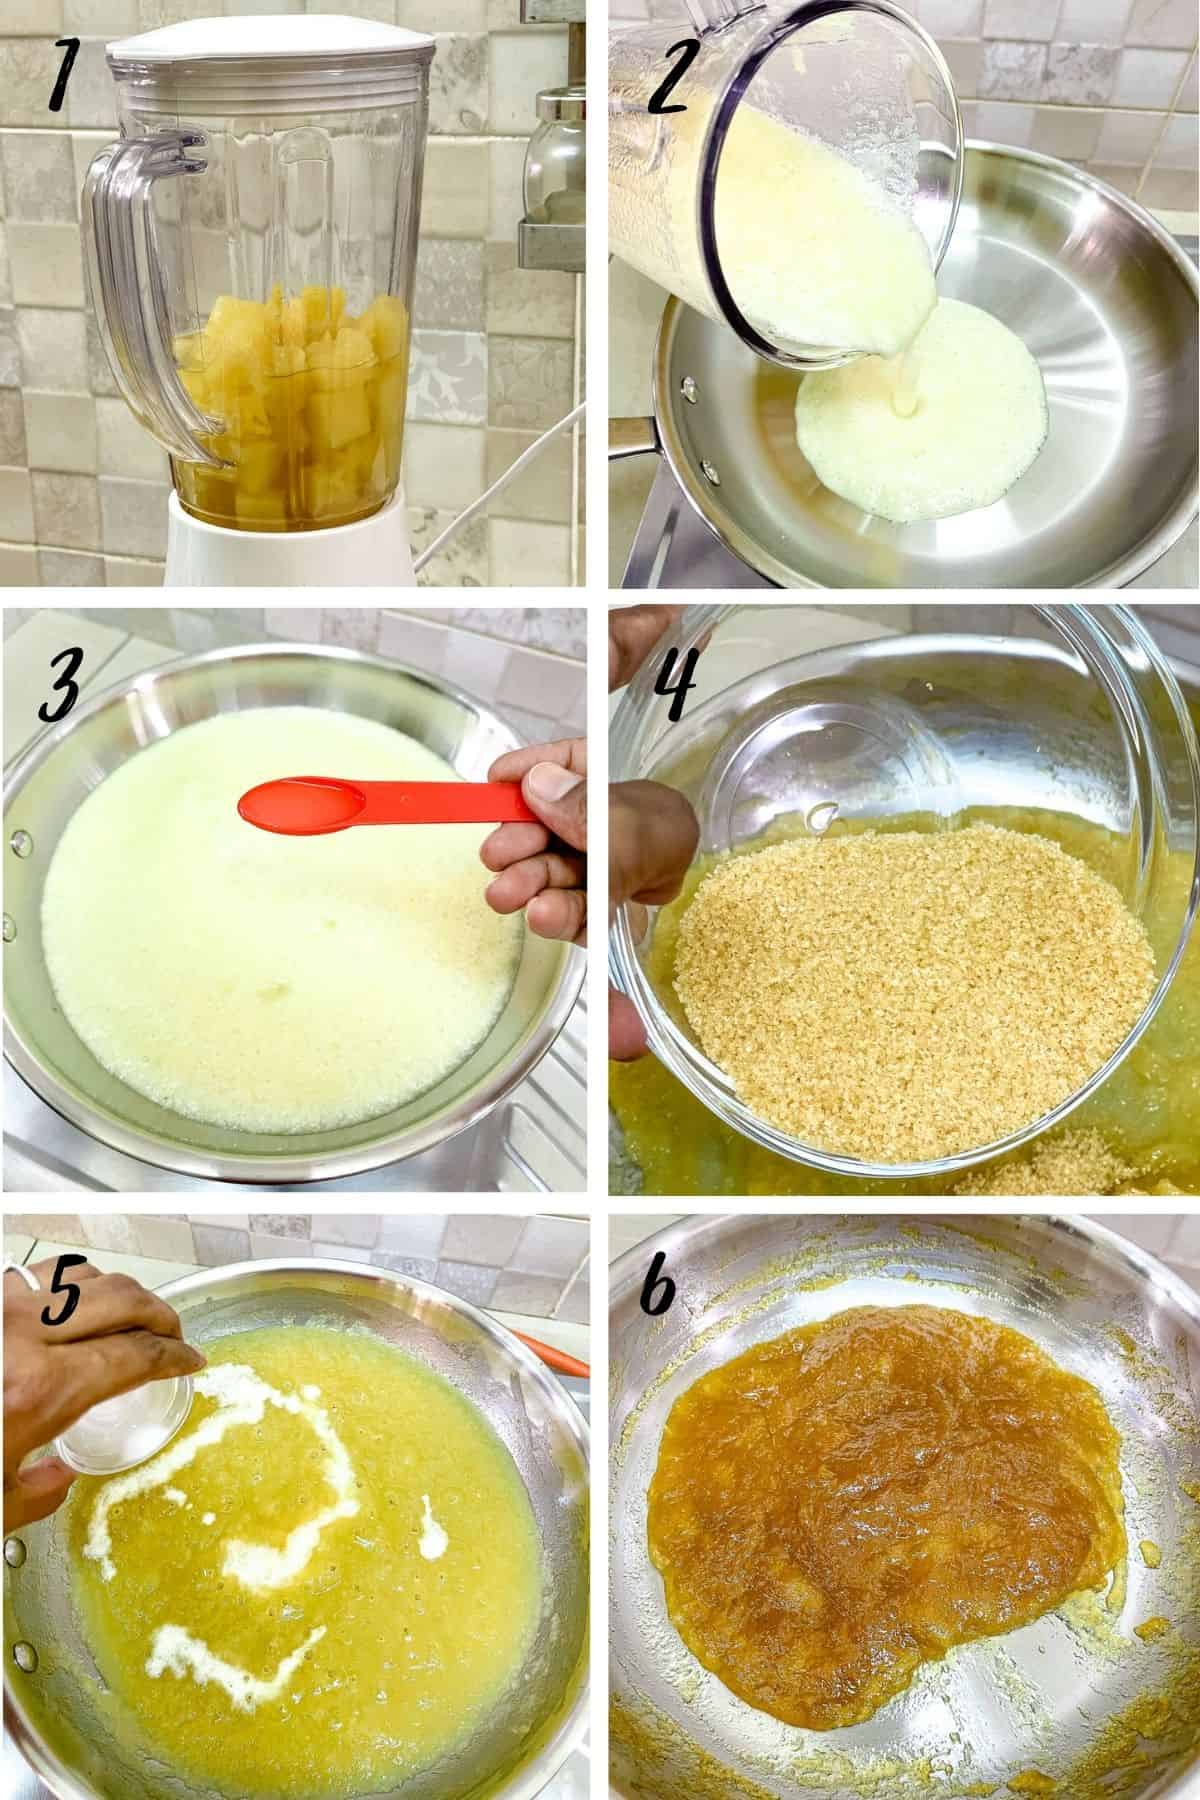 A poster of 6 images showing how to make pineapple filling